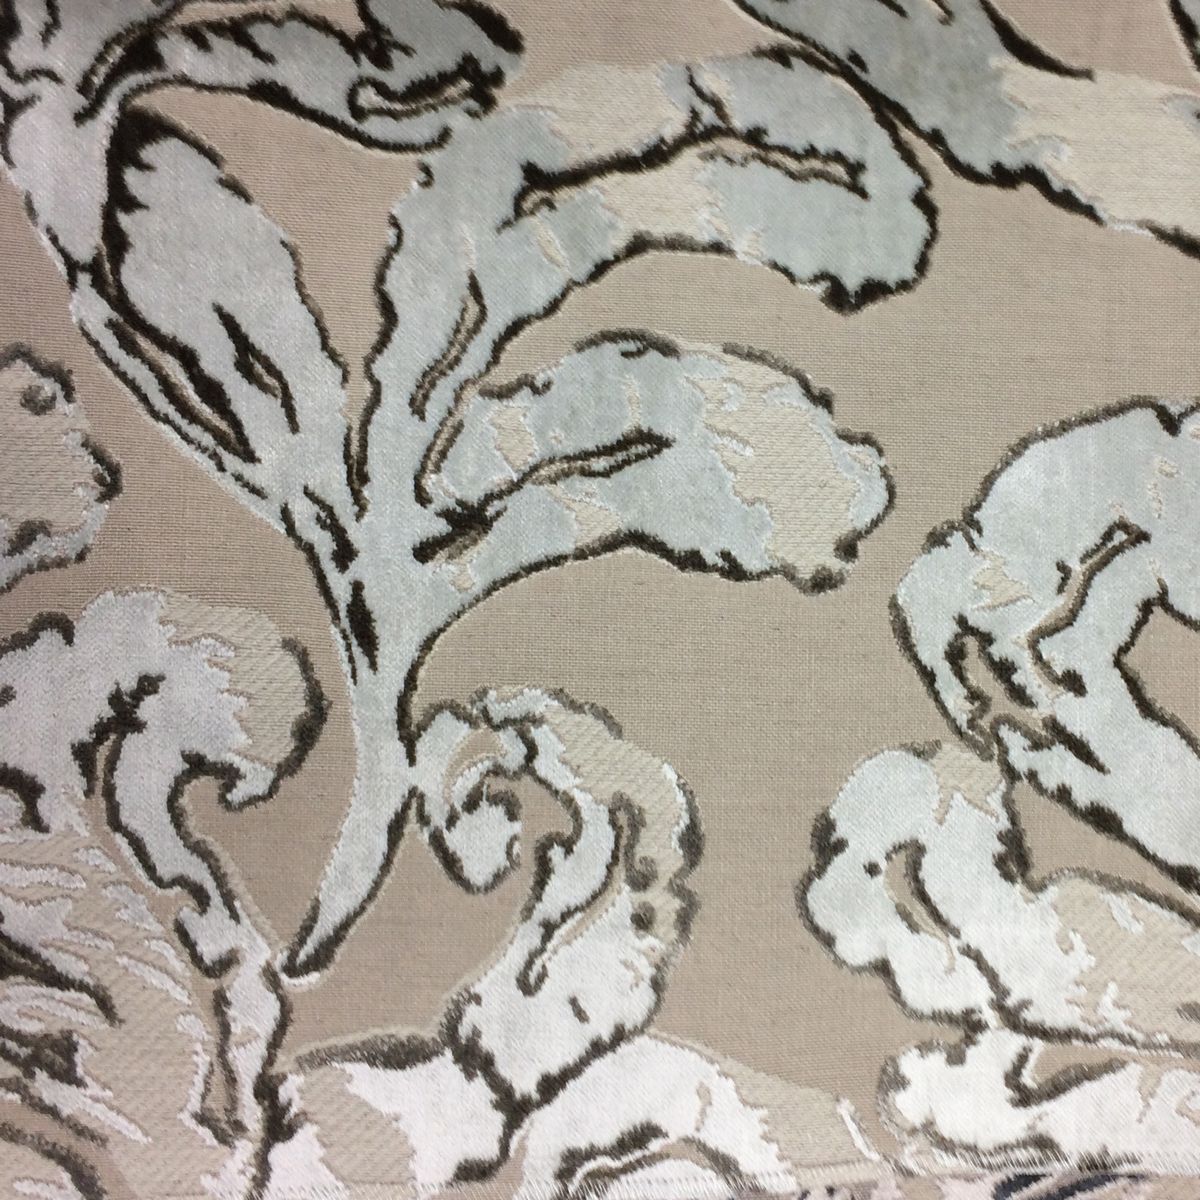 Versus Sepia Fabric by Voyage Maison